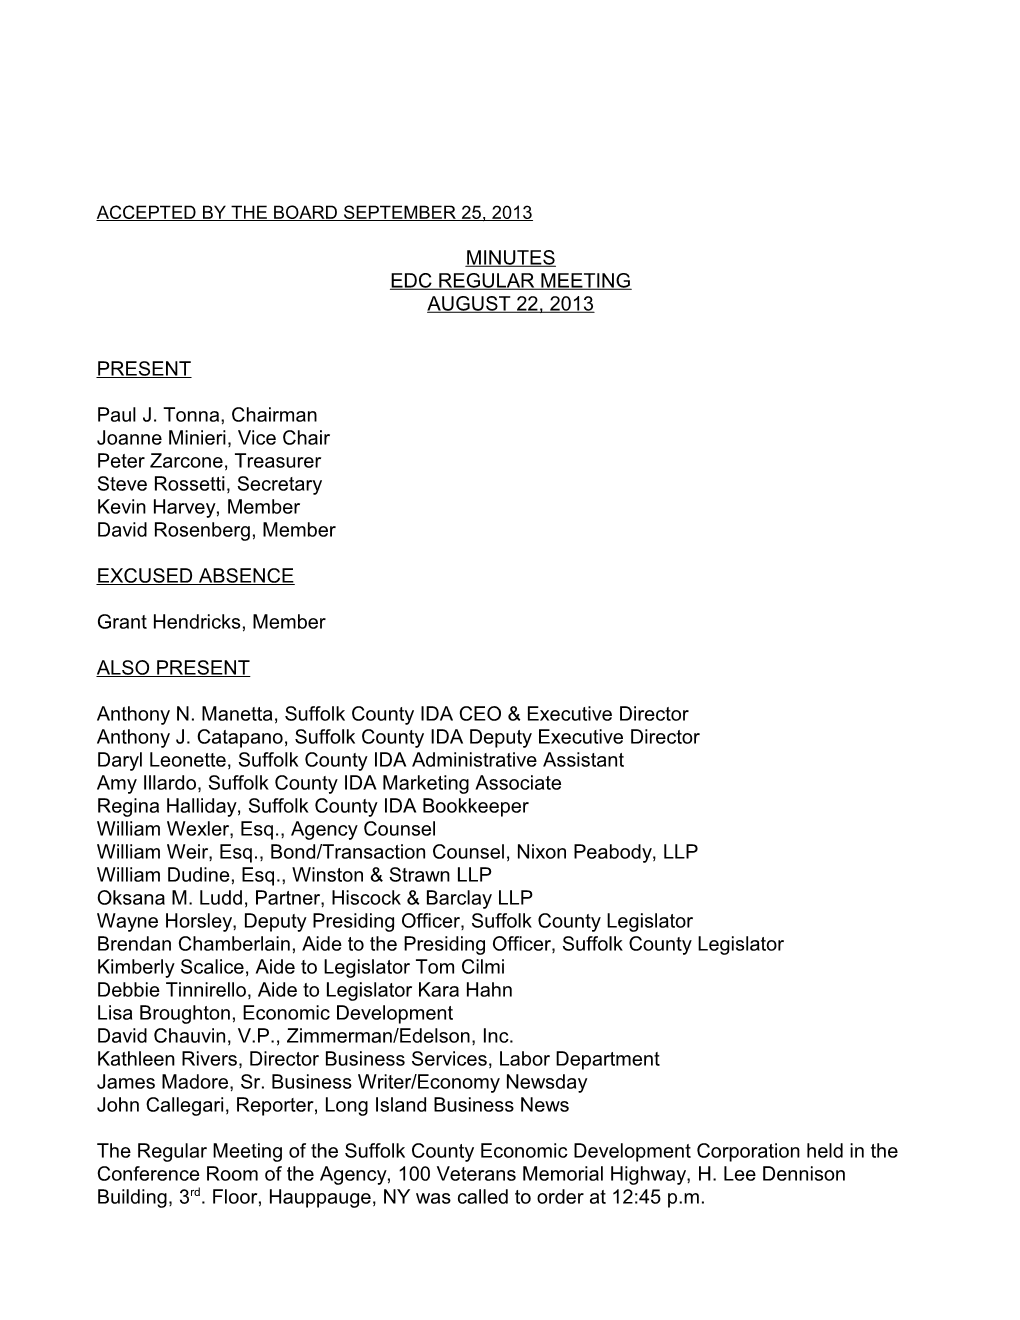 Accepted by the Board September 25, 2013